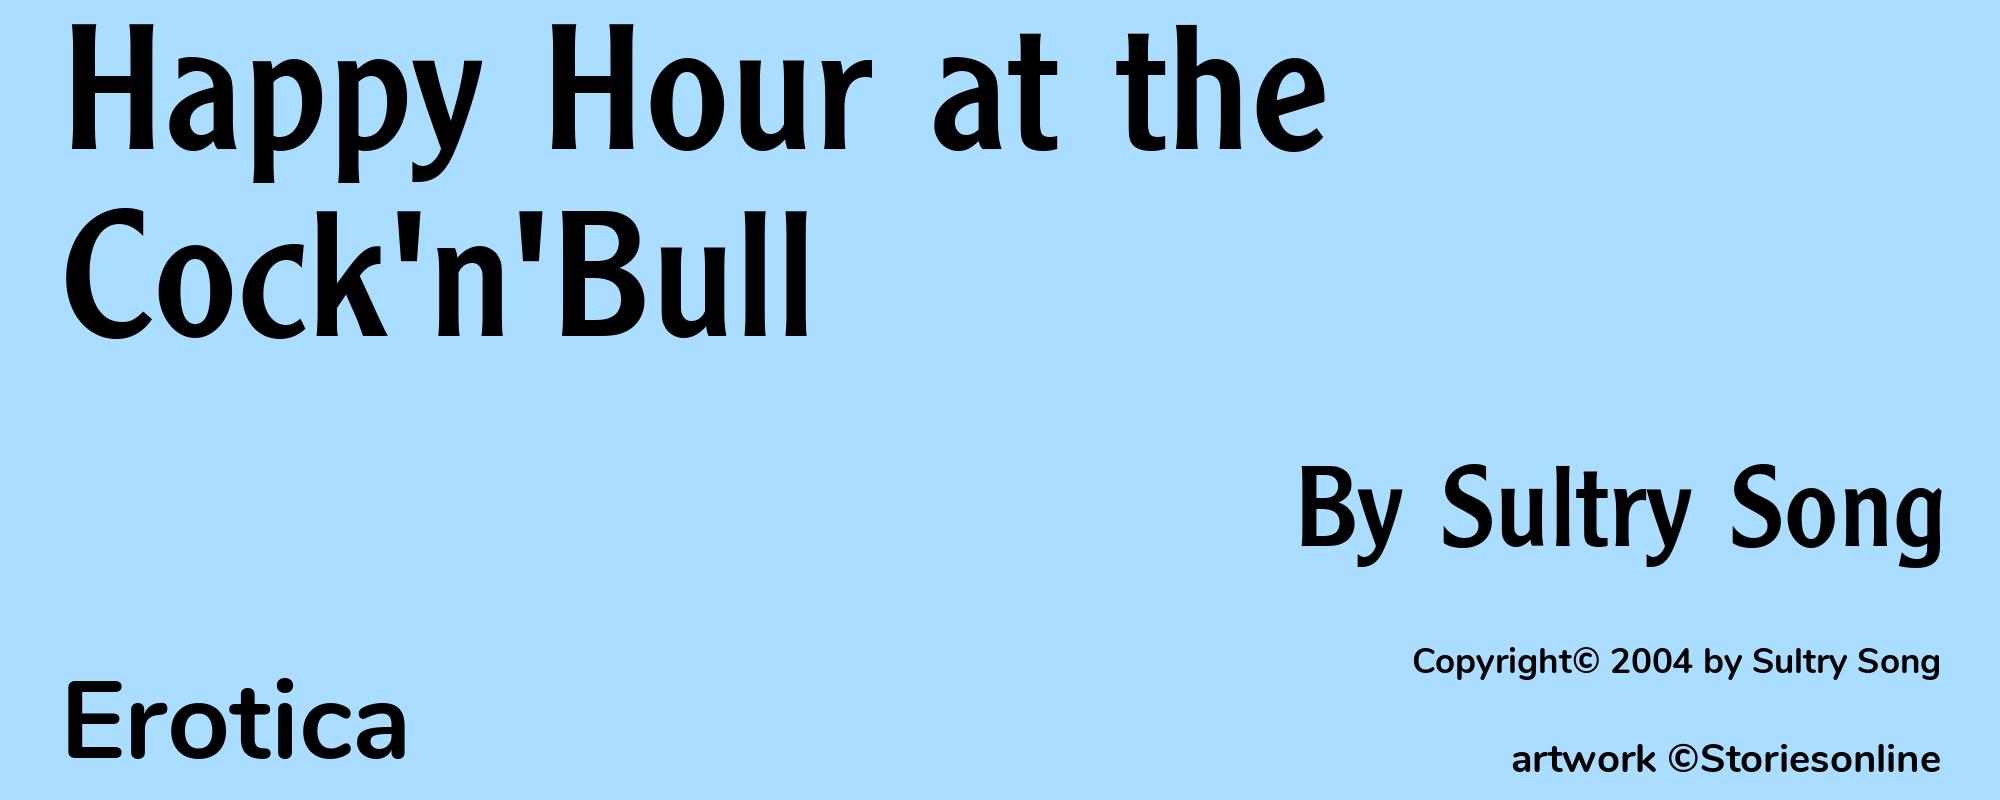 Happy Hour at the Cock'n'Bull - Cover